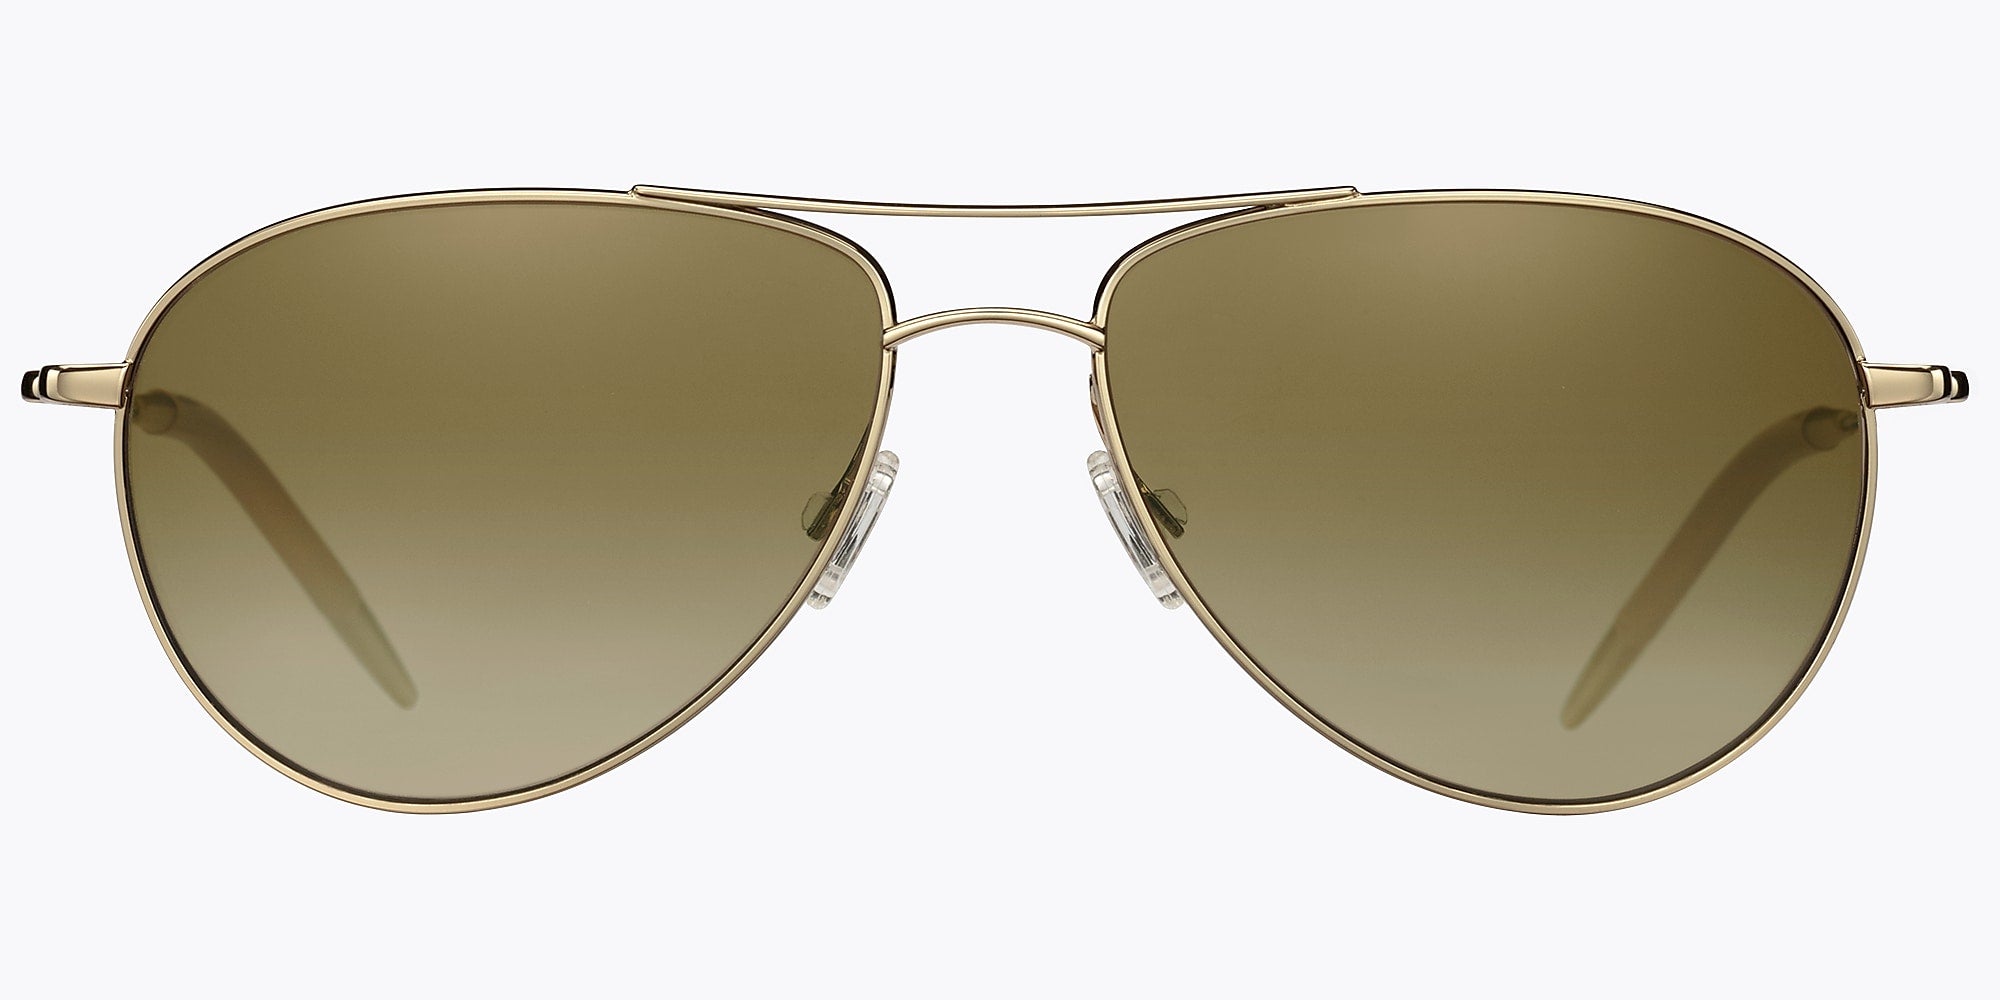 Oliver Peoples Benedict – Optical Heights